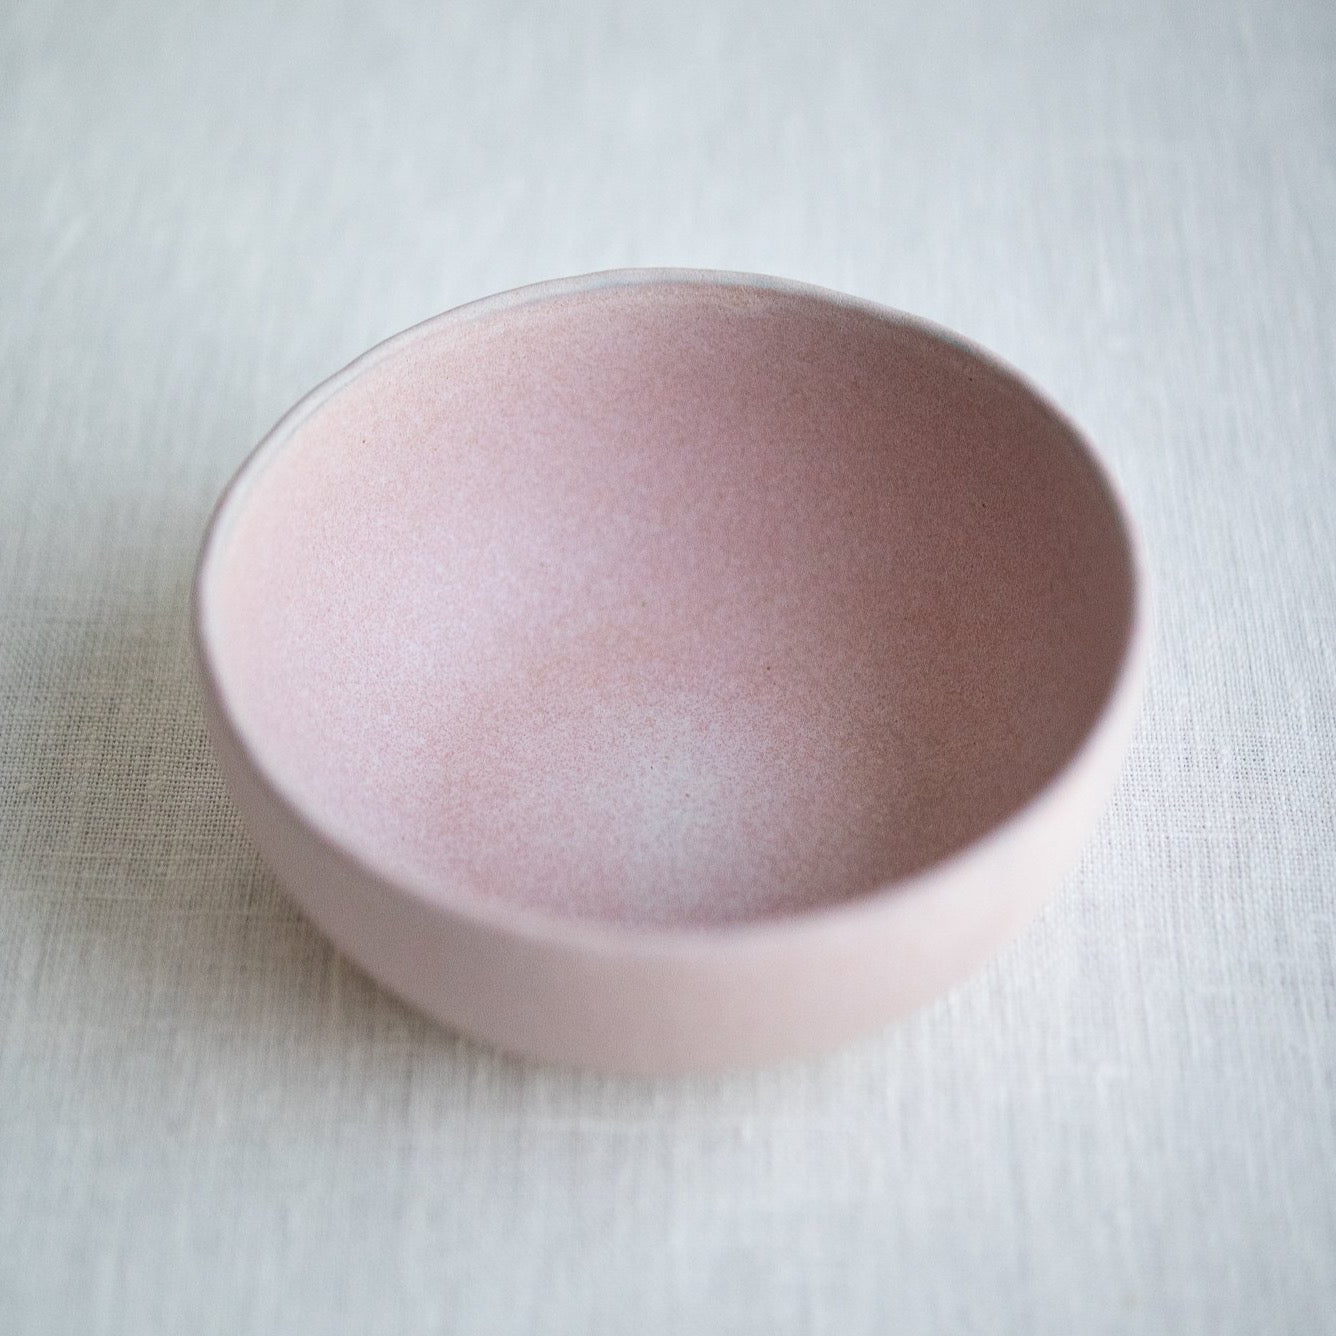 Bowl in pale pink No.1